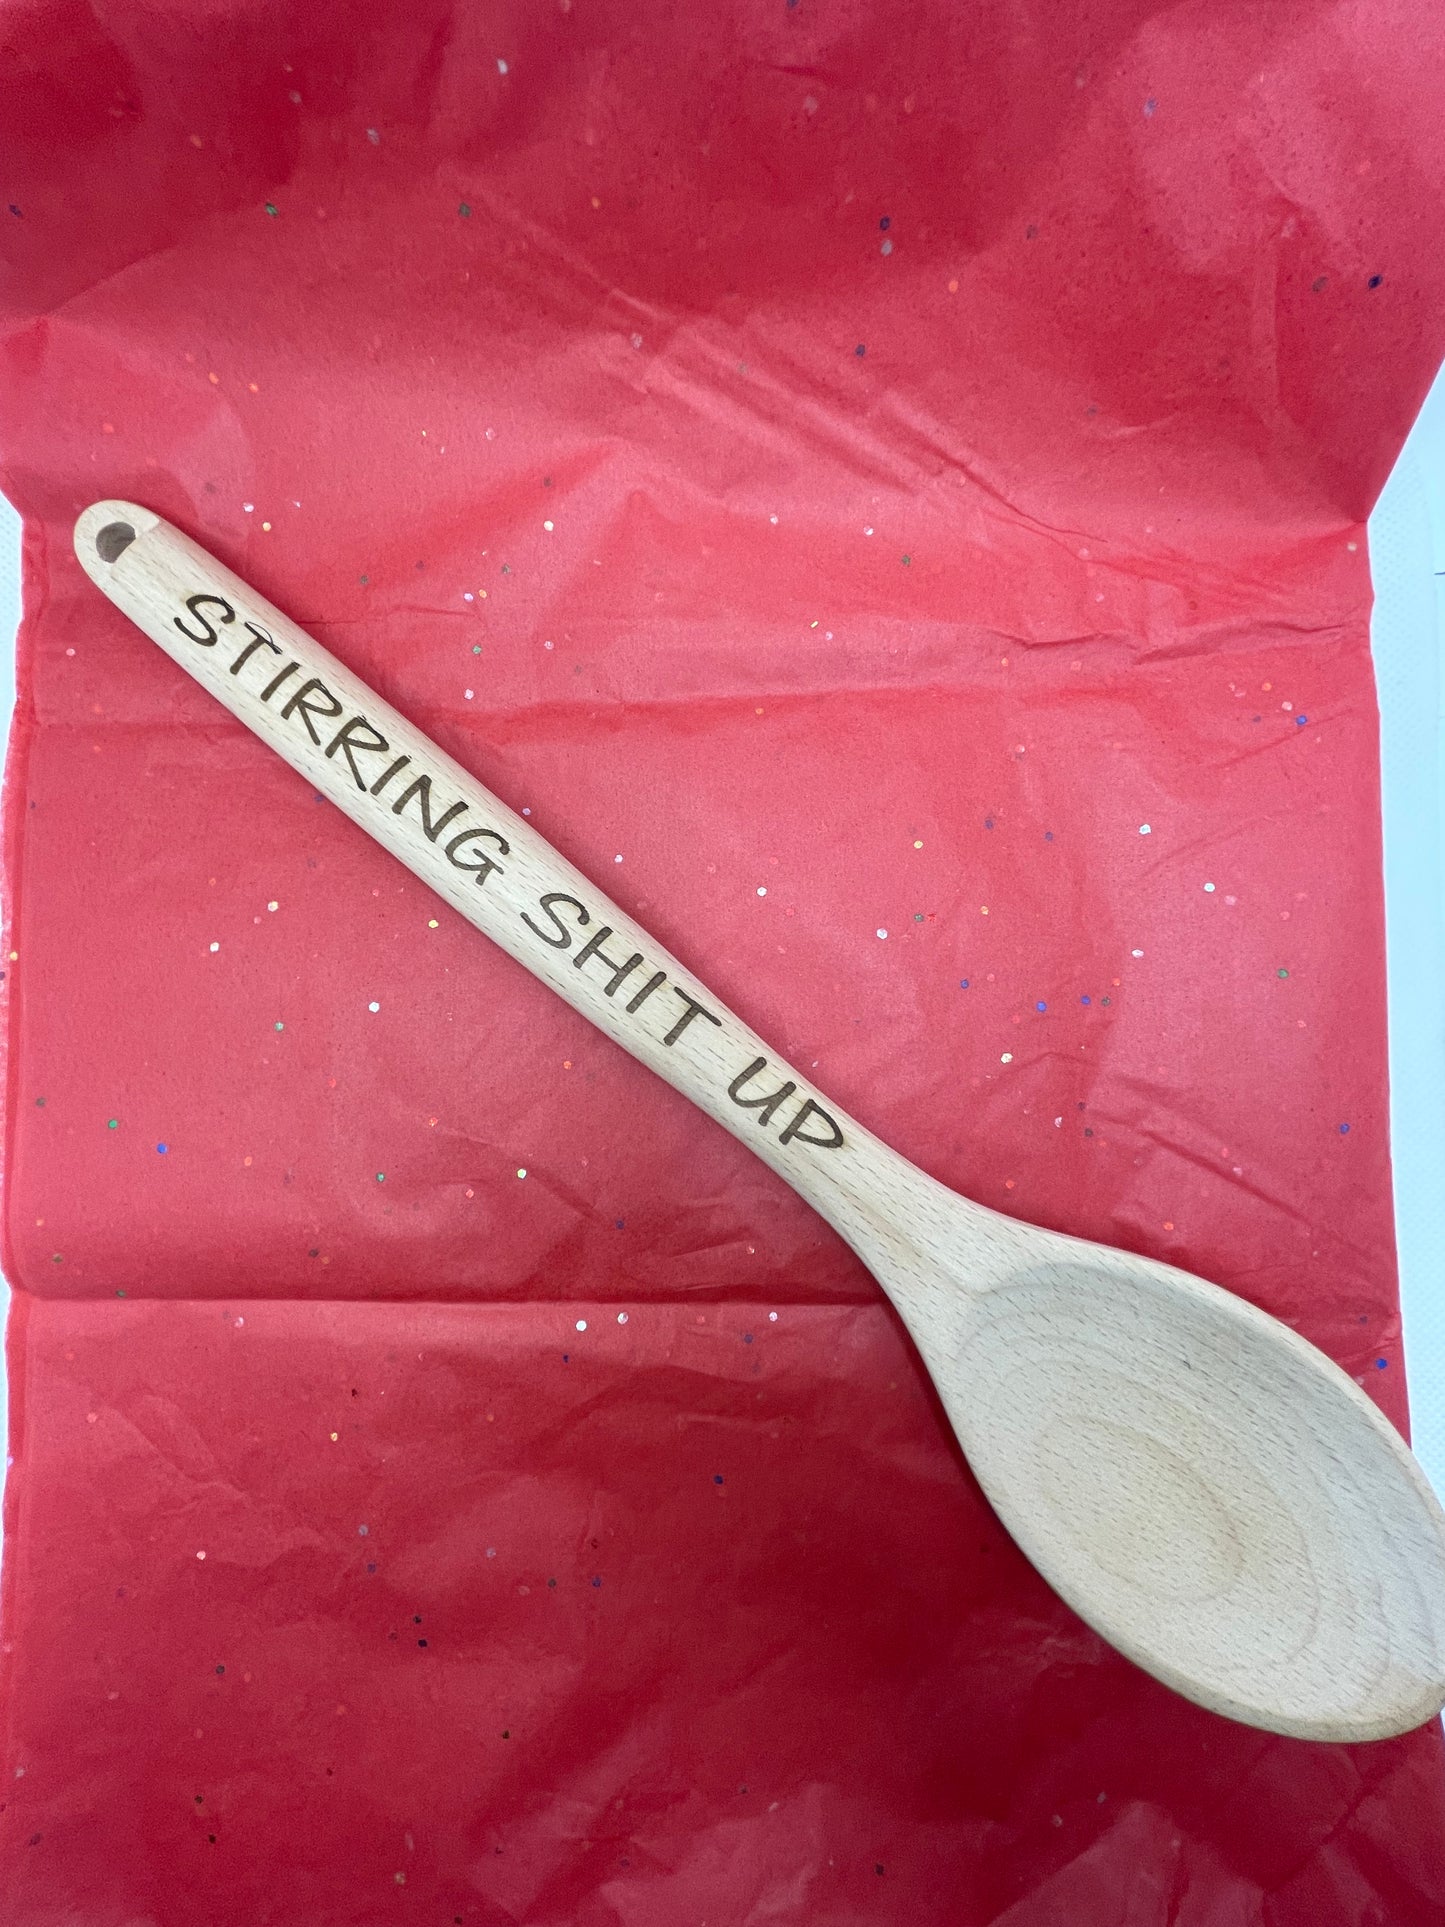 Stirring Shit Up Wooden Spoon